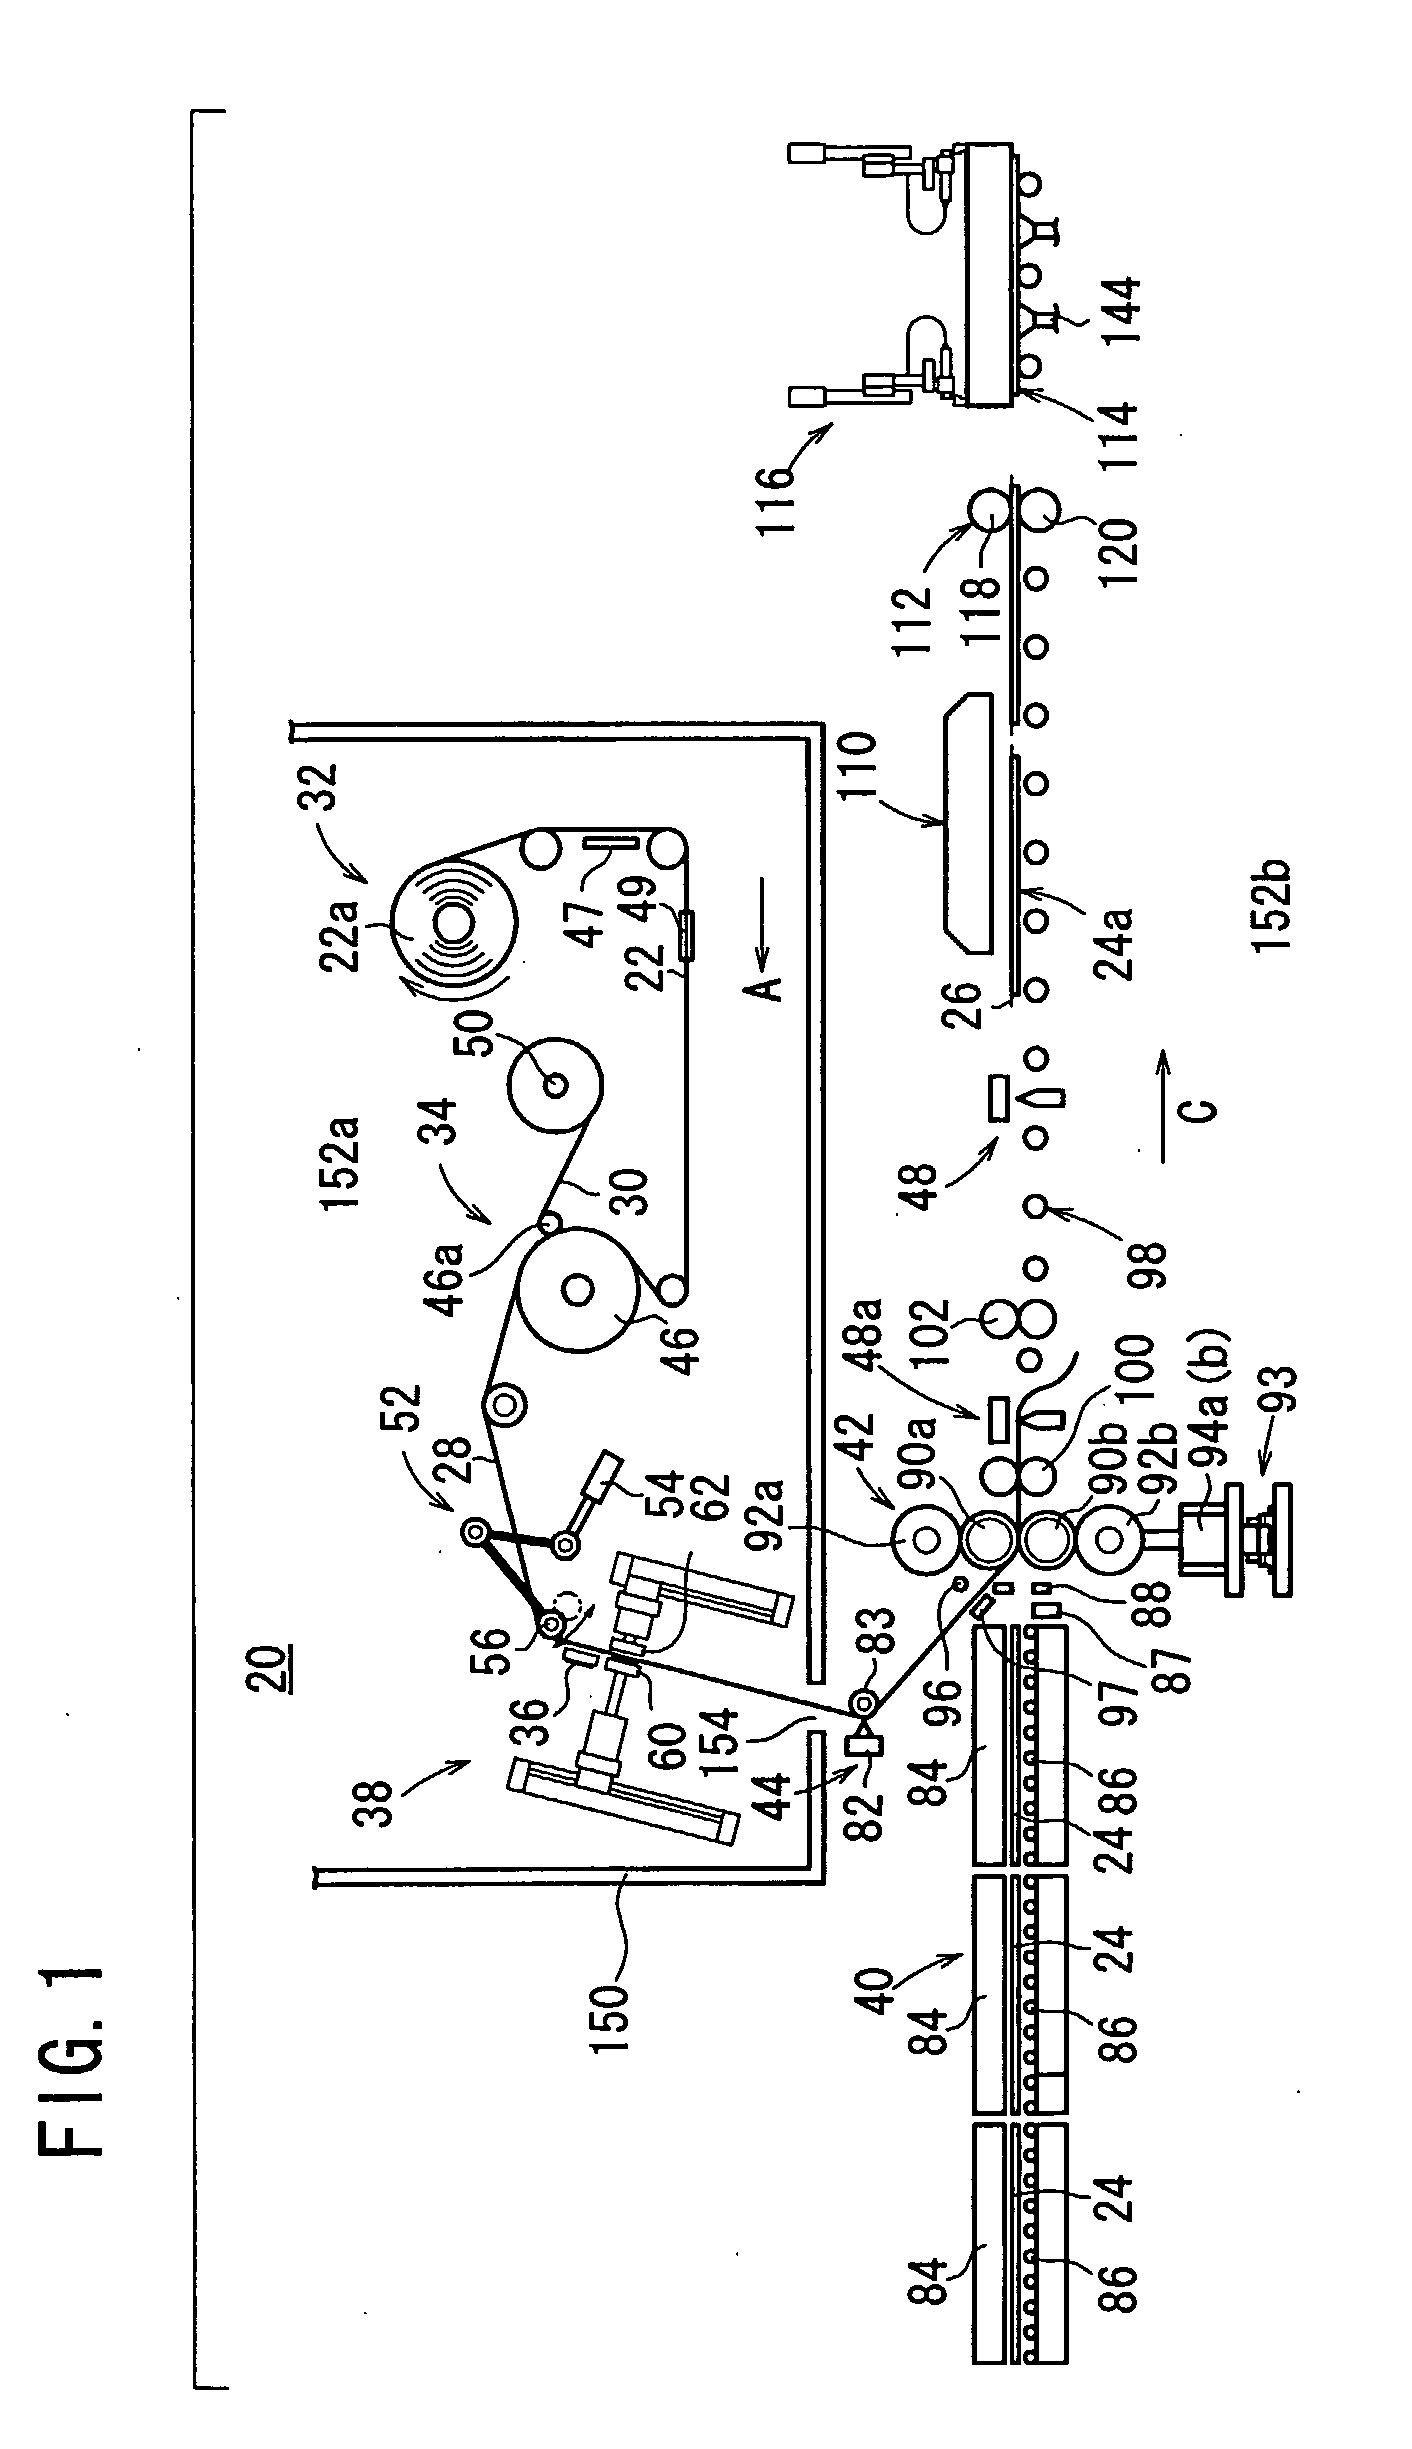 Method of and apparatus for laminated substrate assembly